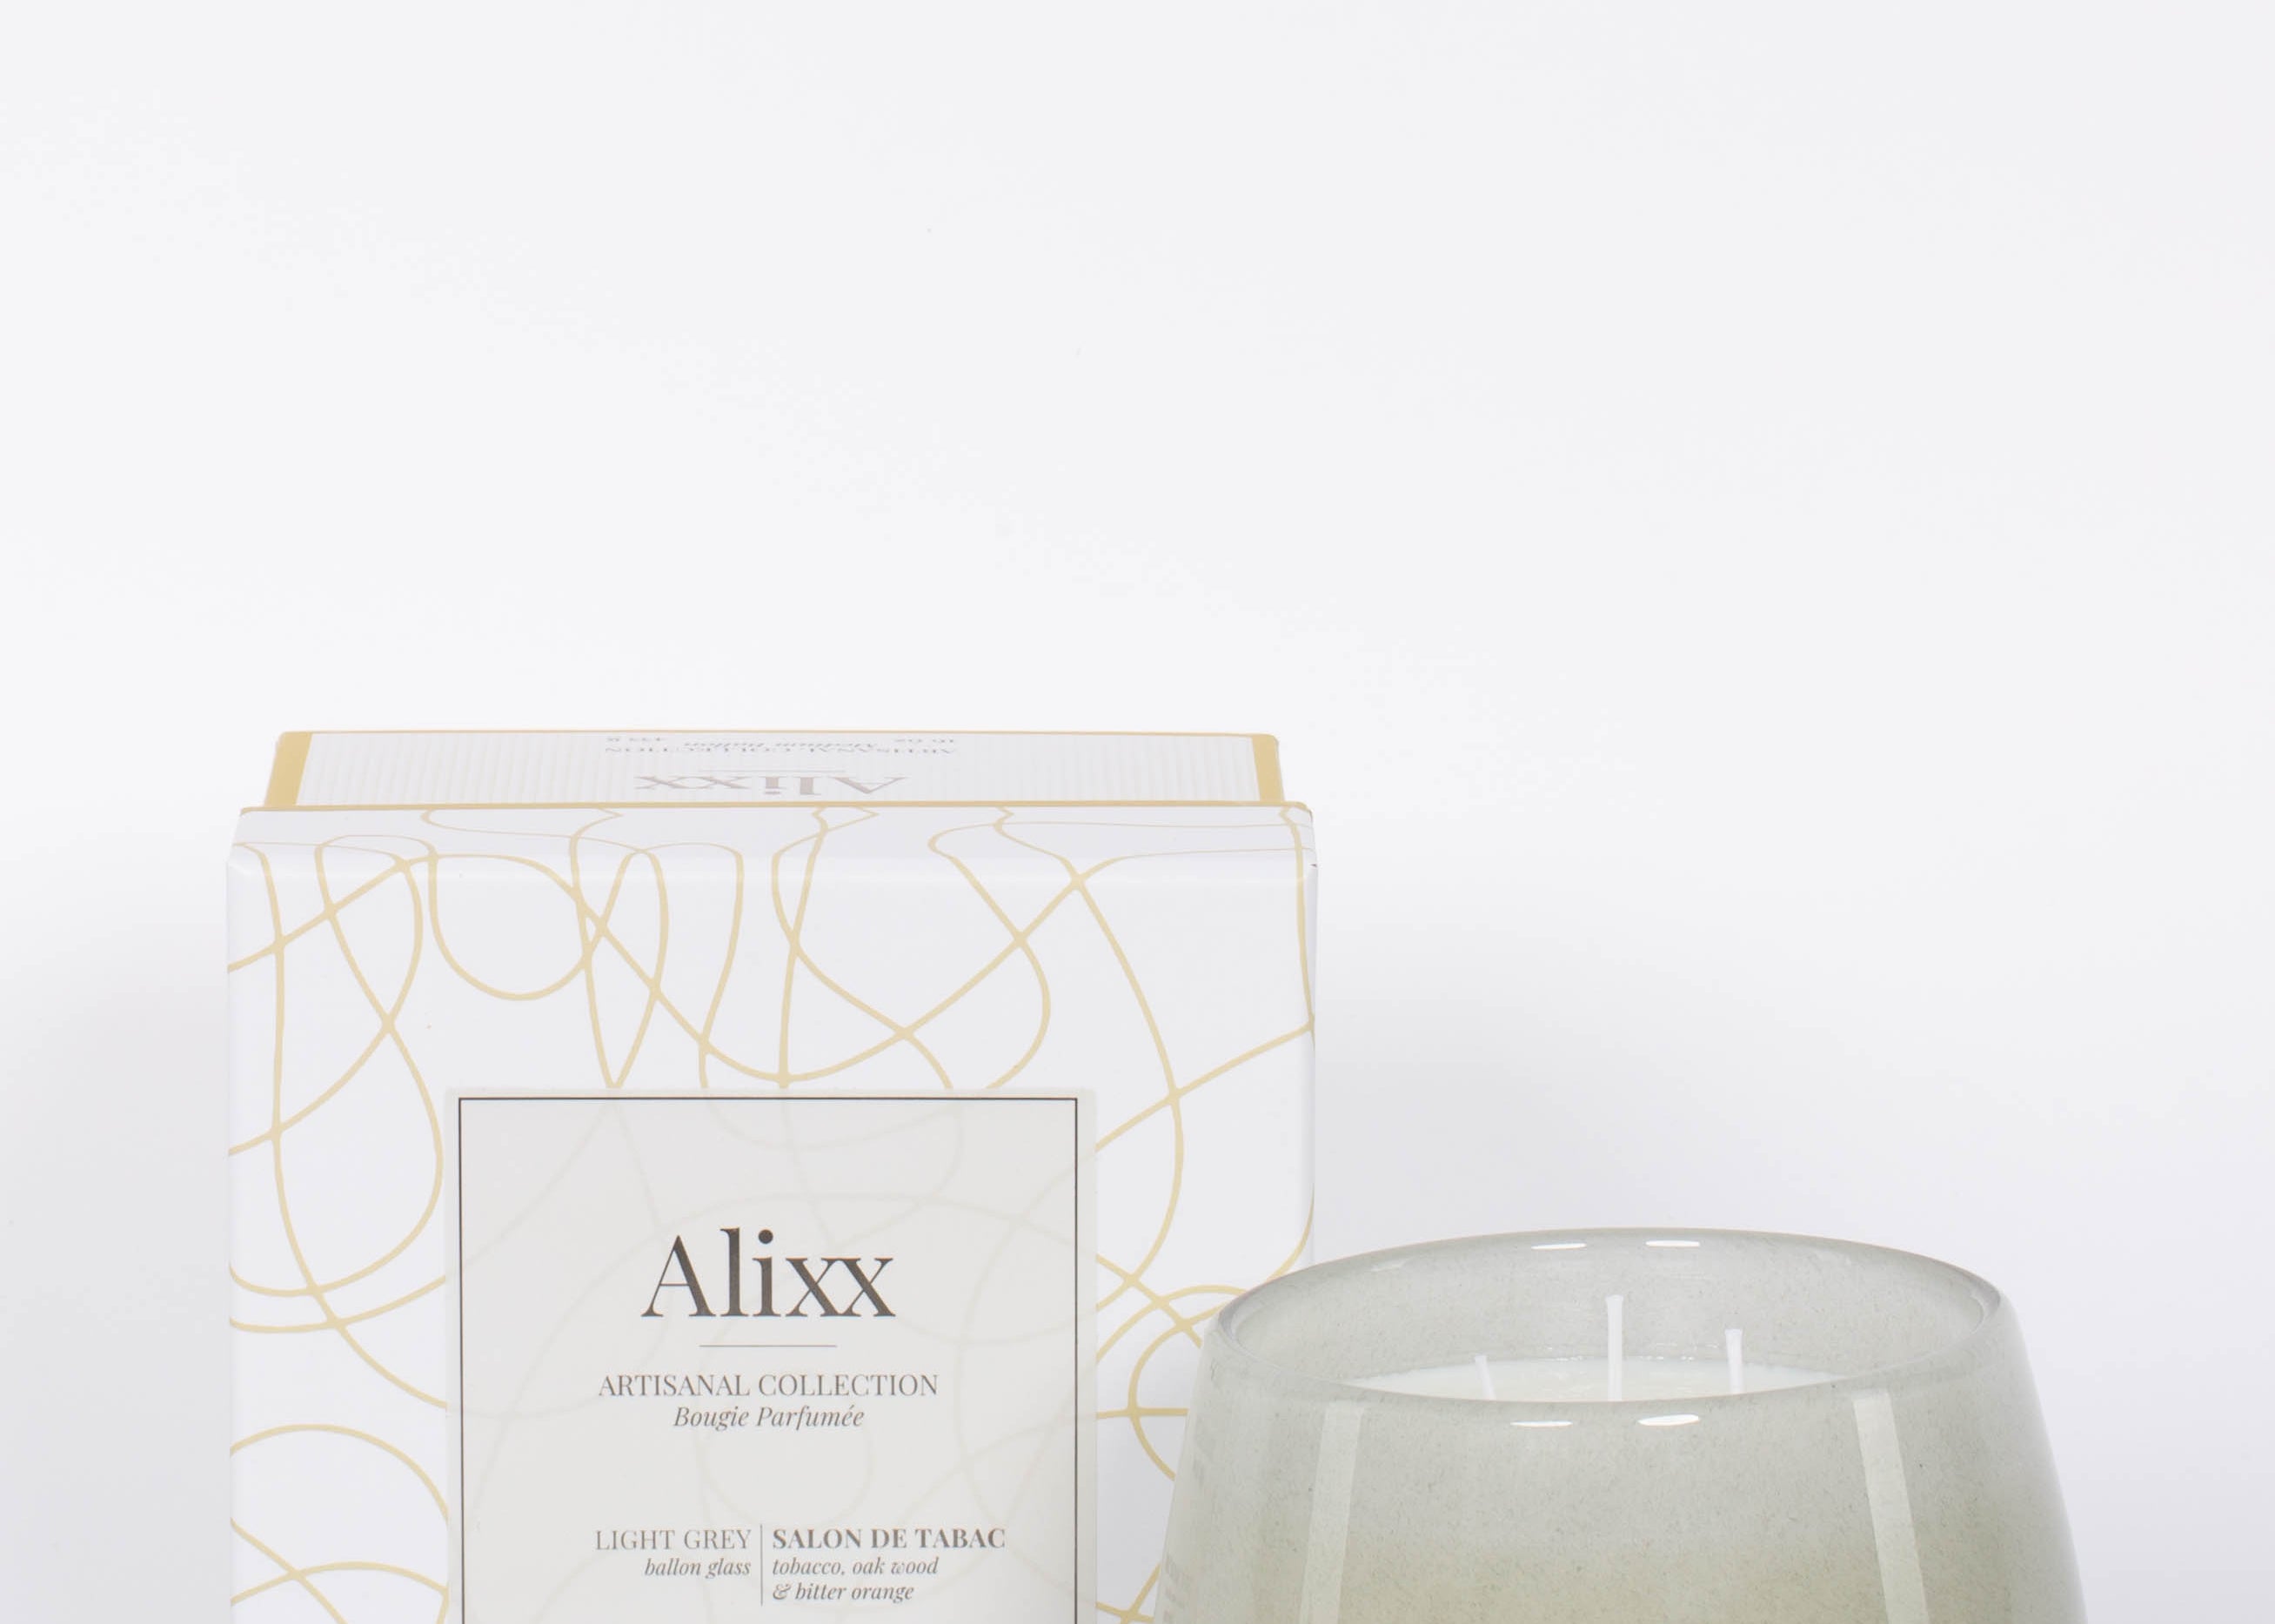 Paris inspired Salon De Tabac white two wick candle by Alixx with earthy oak wood, warm bourbon, and sweet plum nectar fragrance.  White and gold packaging box.